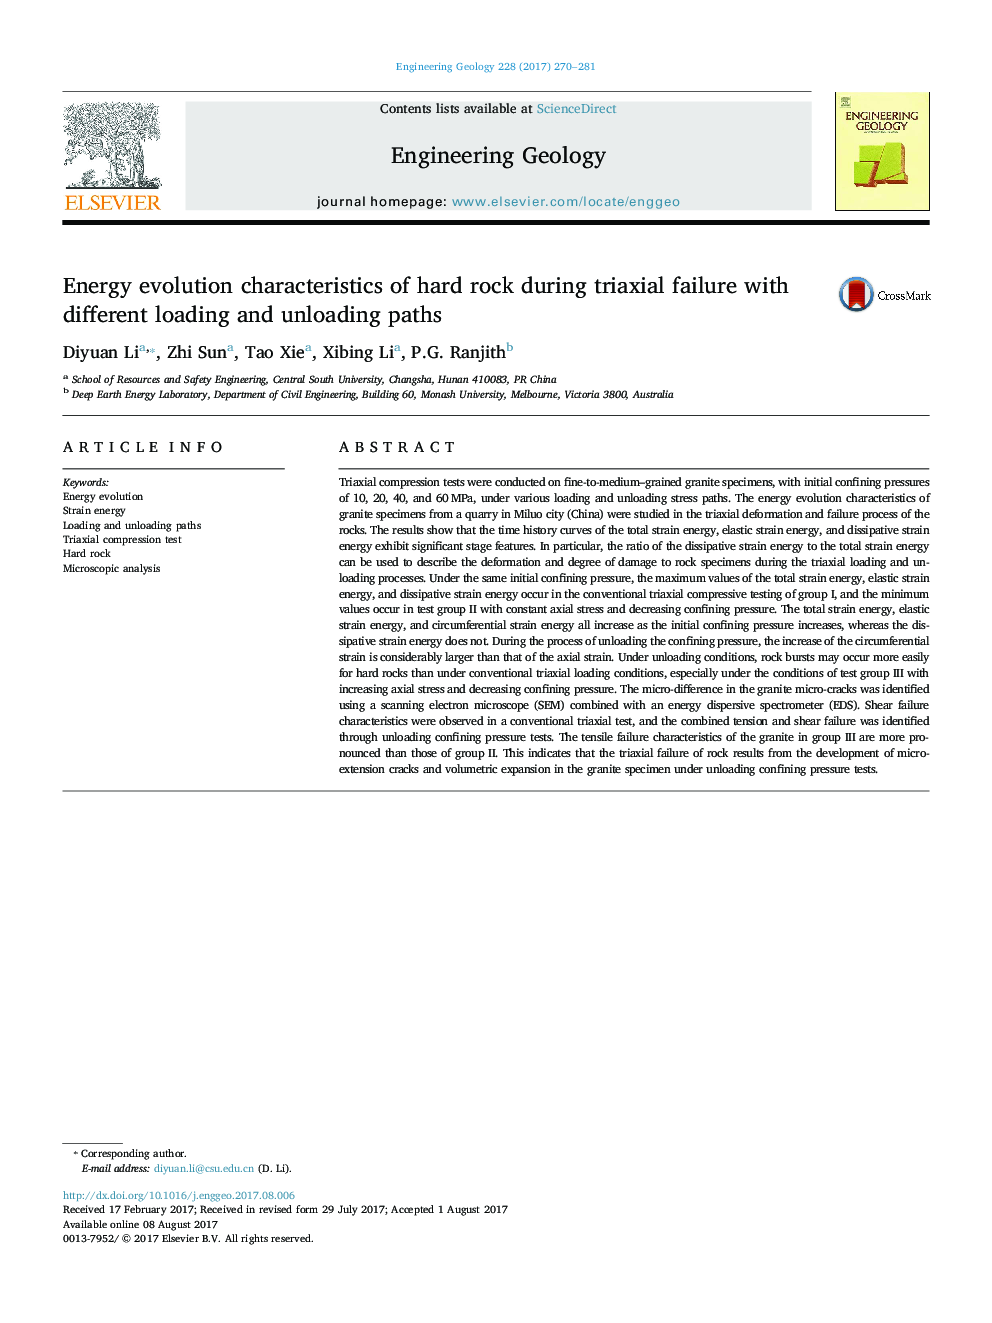 Energy evolution characteristics of hard rock during triaxial failure with different loading and unloading paths